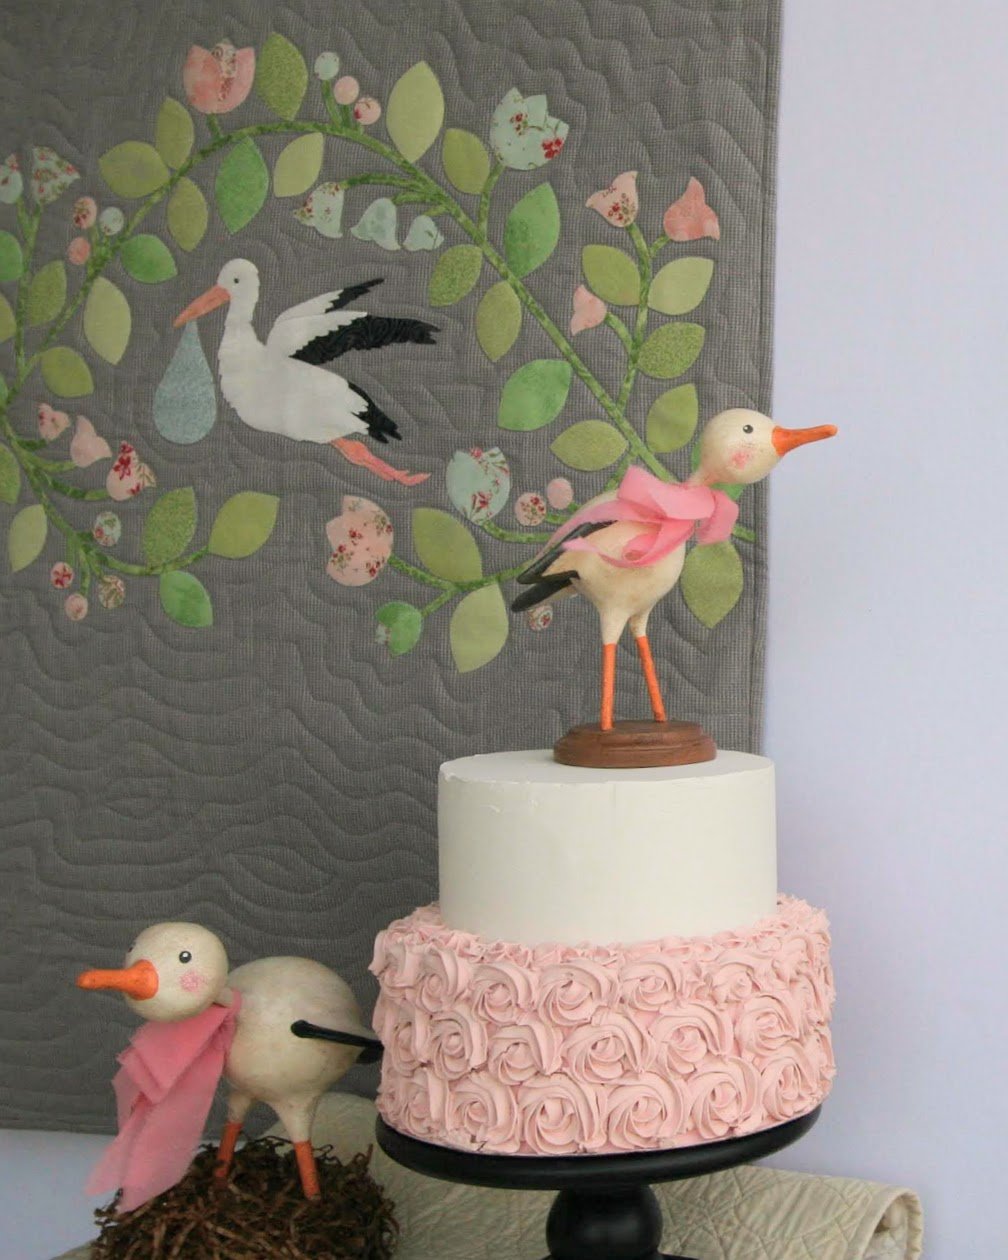 paper mache stork made by Wiggle Creek Designs to celebrate baby shower